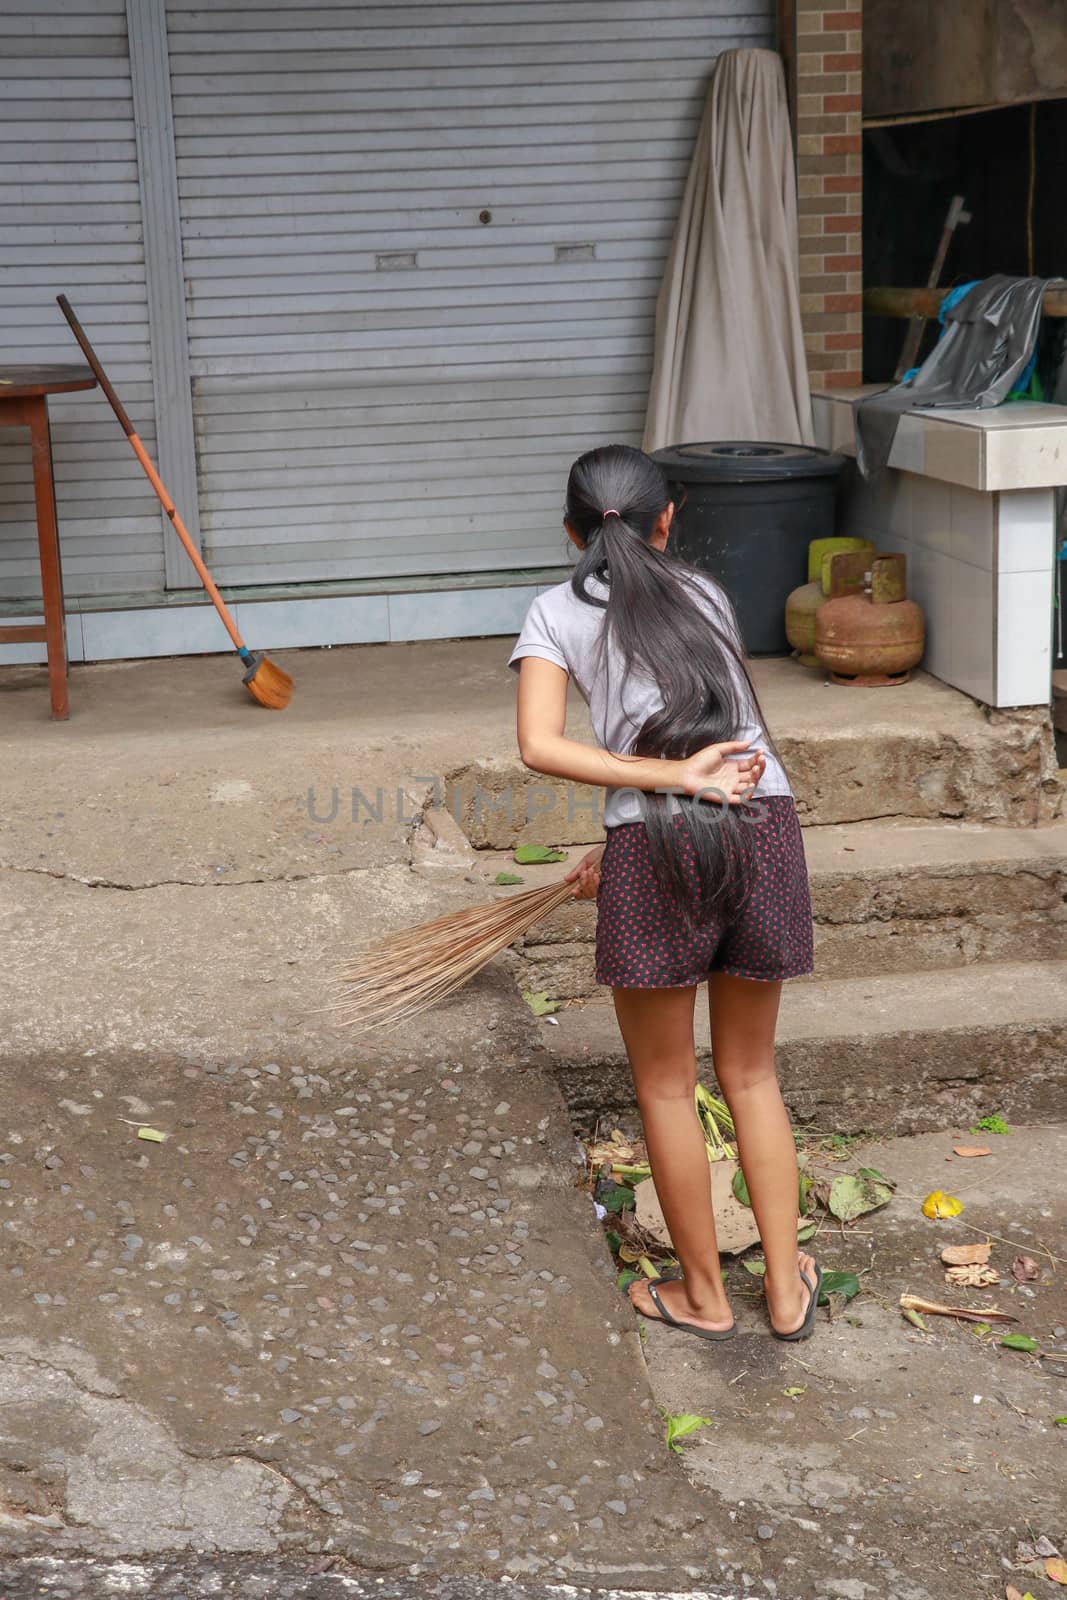 Woman cleaning service with broom stick and dustpan clean up the road. Balinese girl sweeps garbage and dry leaves in front of the house. Bali, Indonesia by Sanatana2008